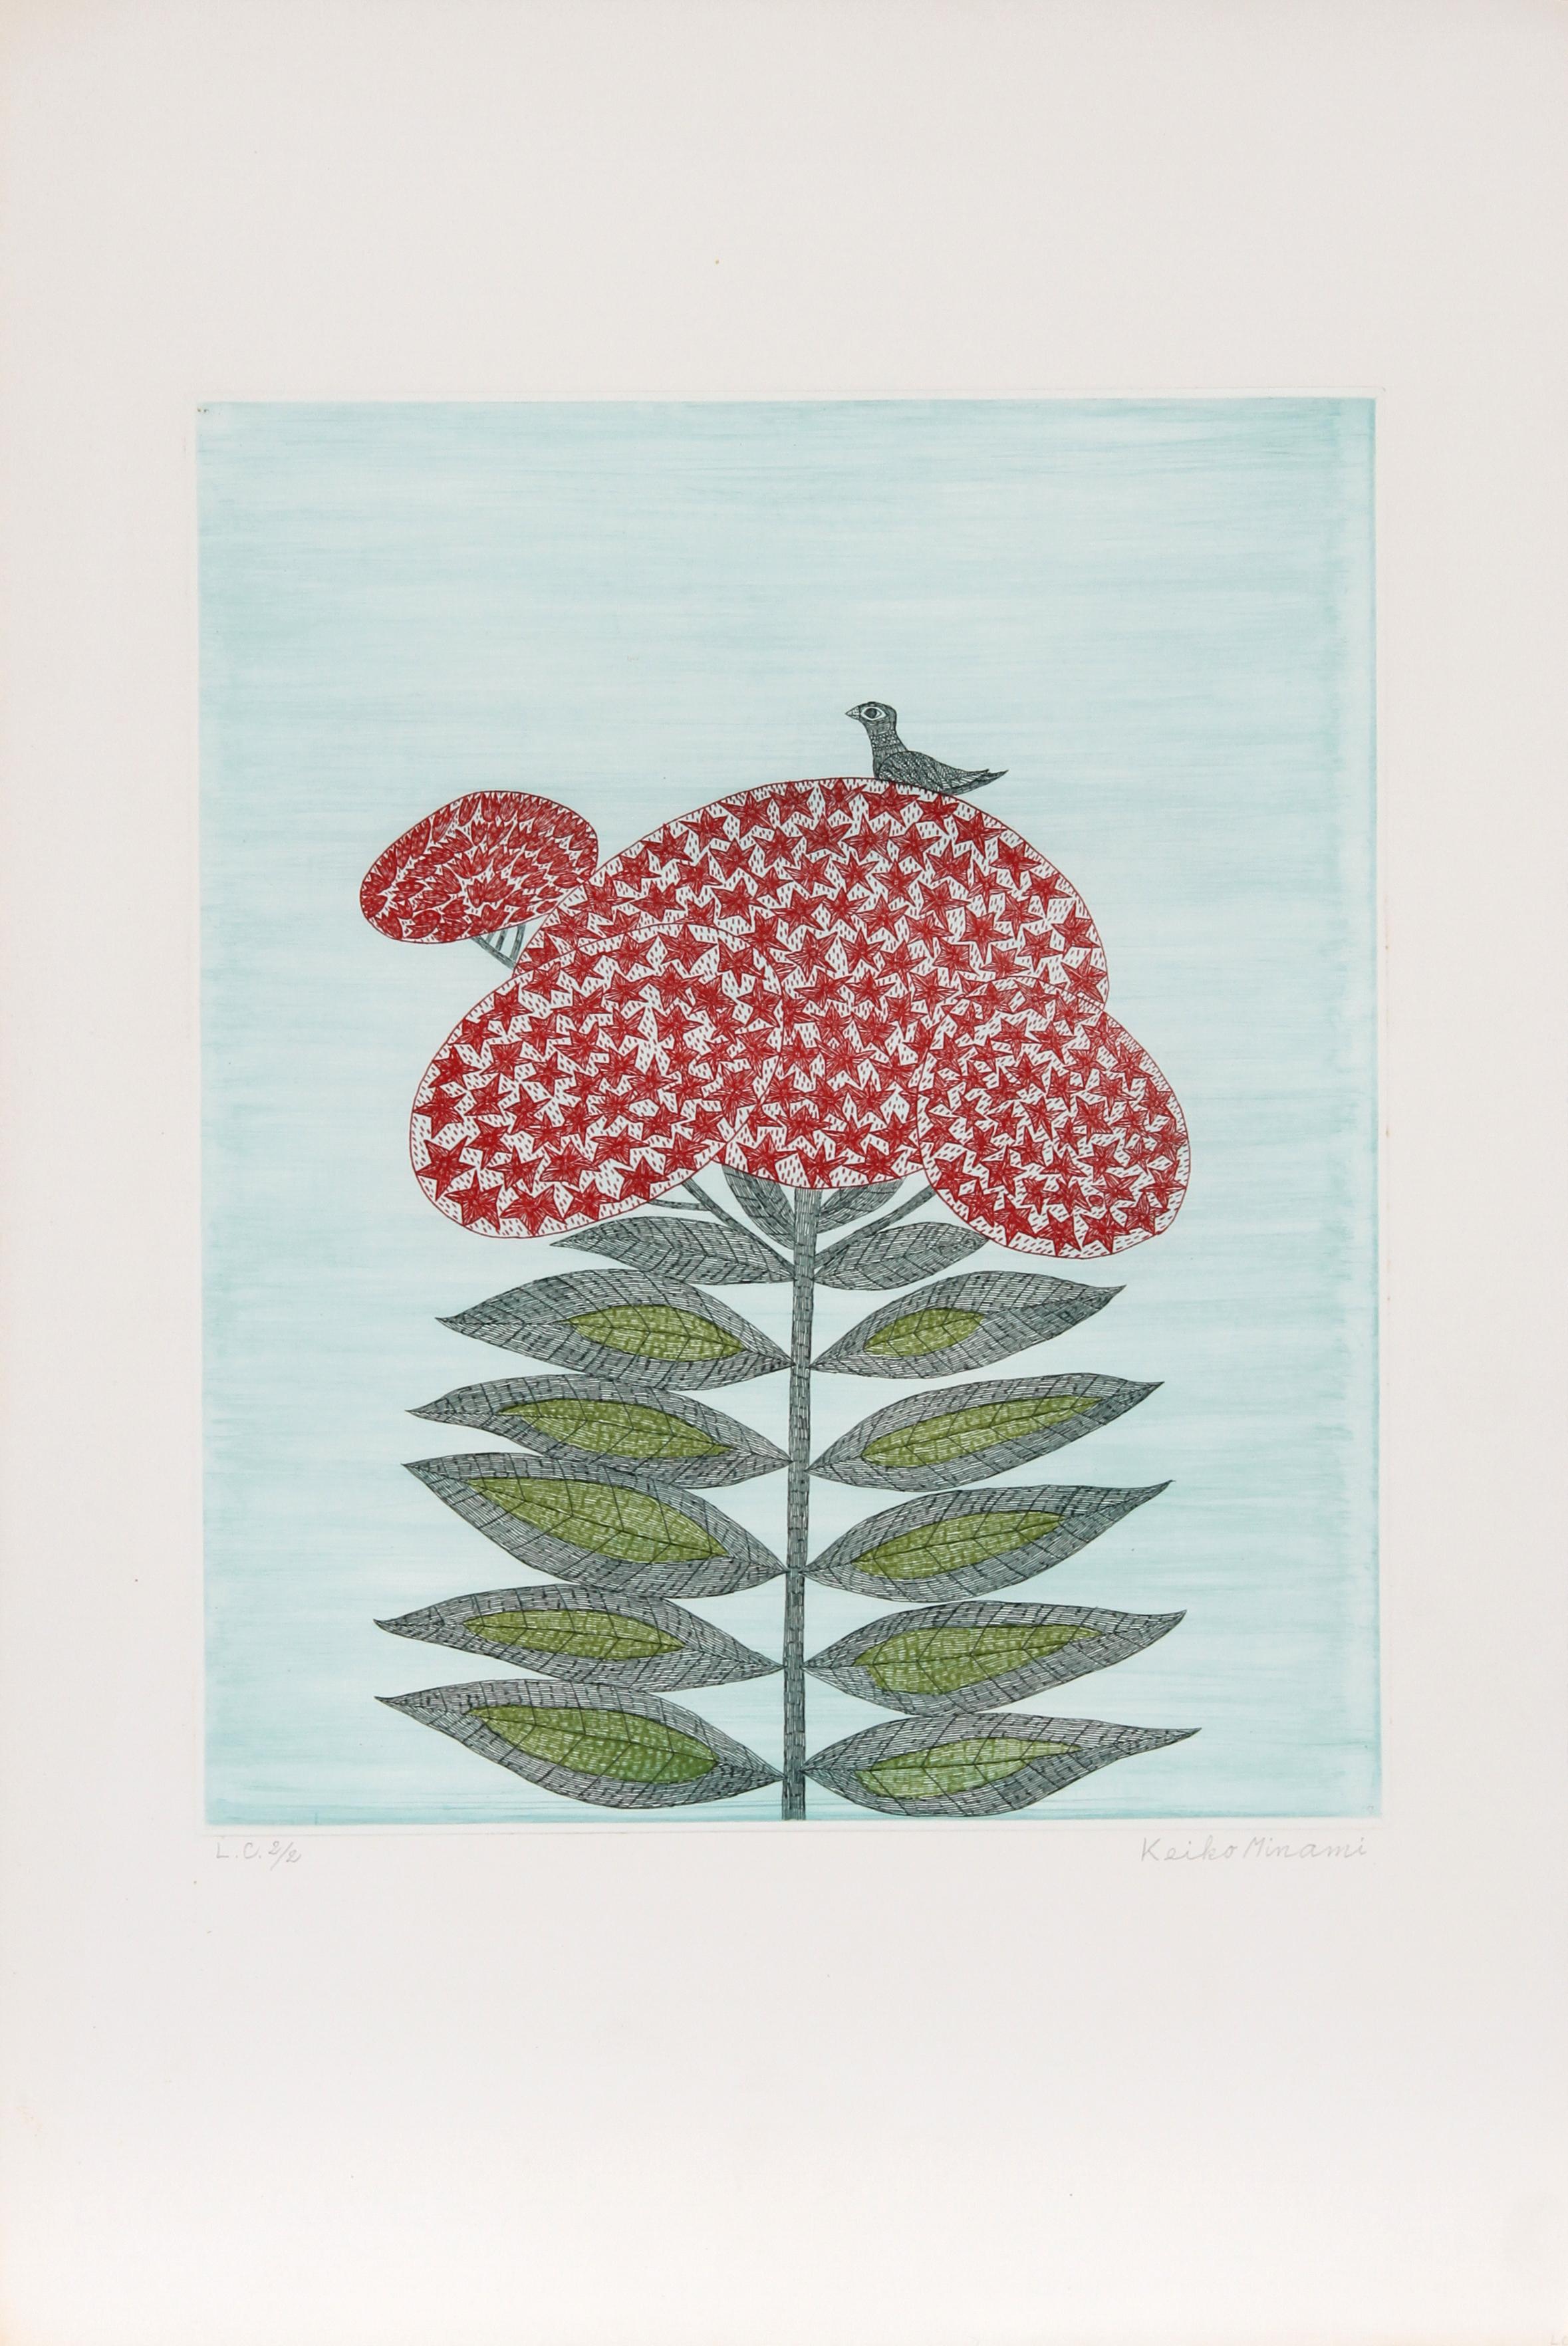 Artist: Keiko Minami, Japanese (1911 - 2004)
Title: Bird On Flower 
Year: circa 1985
Medium: Aquatint Etching, Signed and numbered in pencil
Edition: 120
Image Size: 13 x 11 inches 
Size: 22 in. x 15 in. (55.88 cm x 38.1 cm)